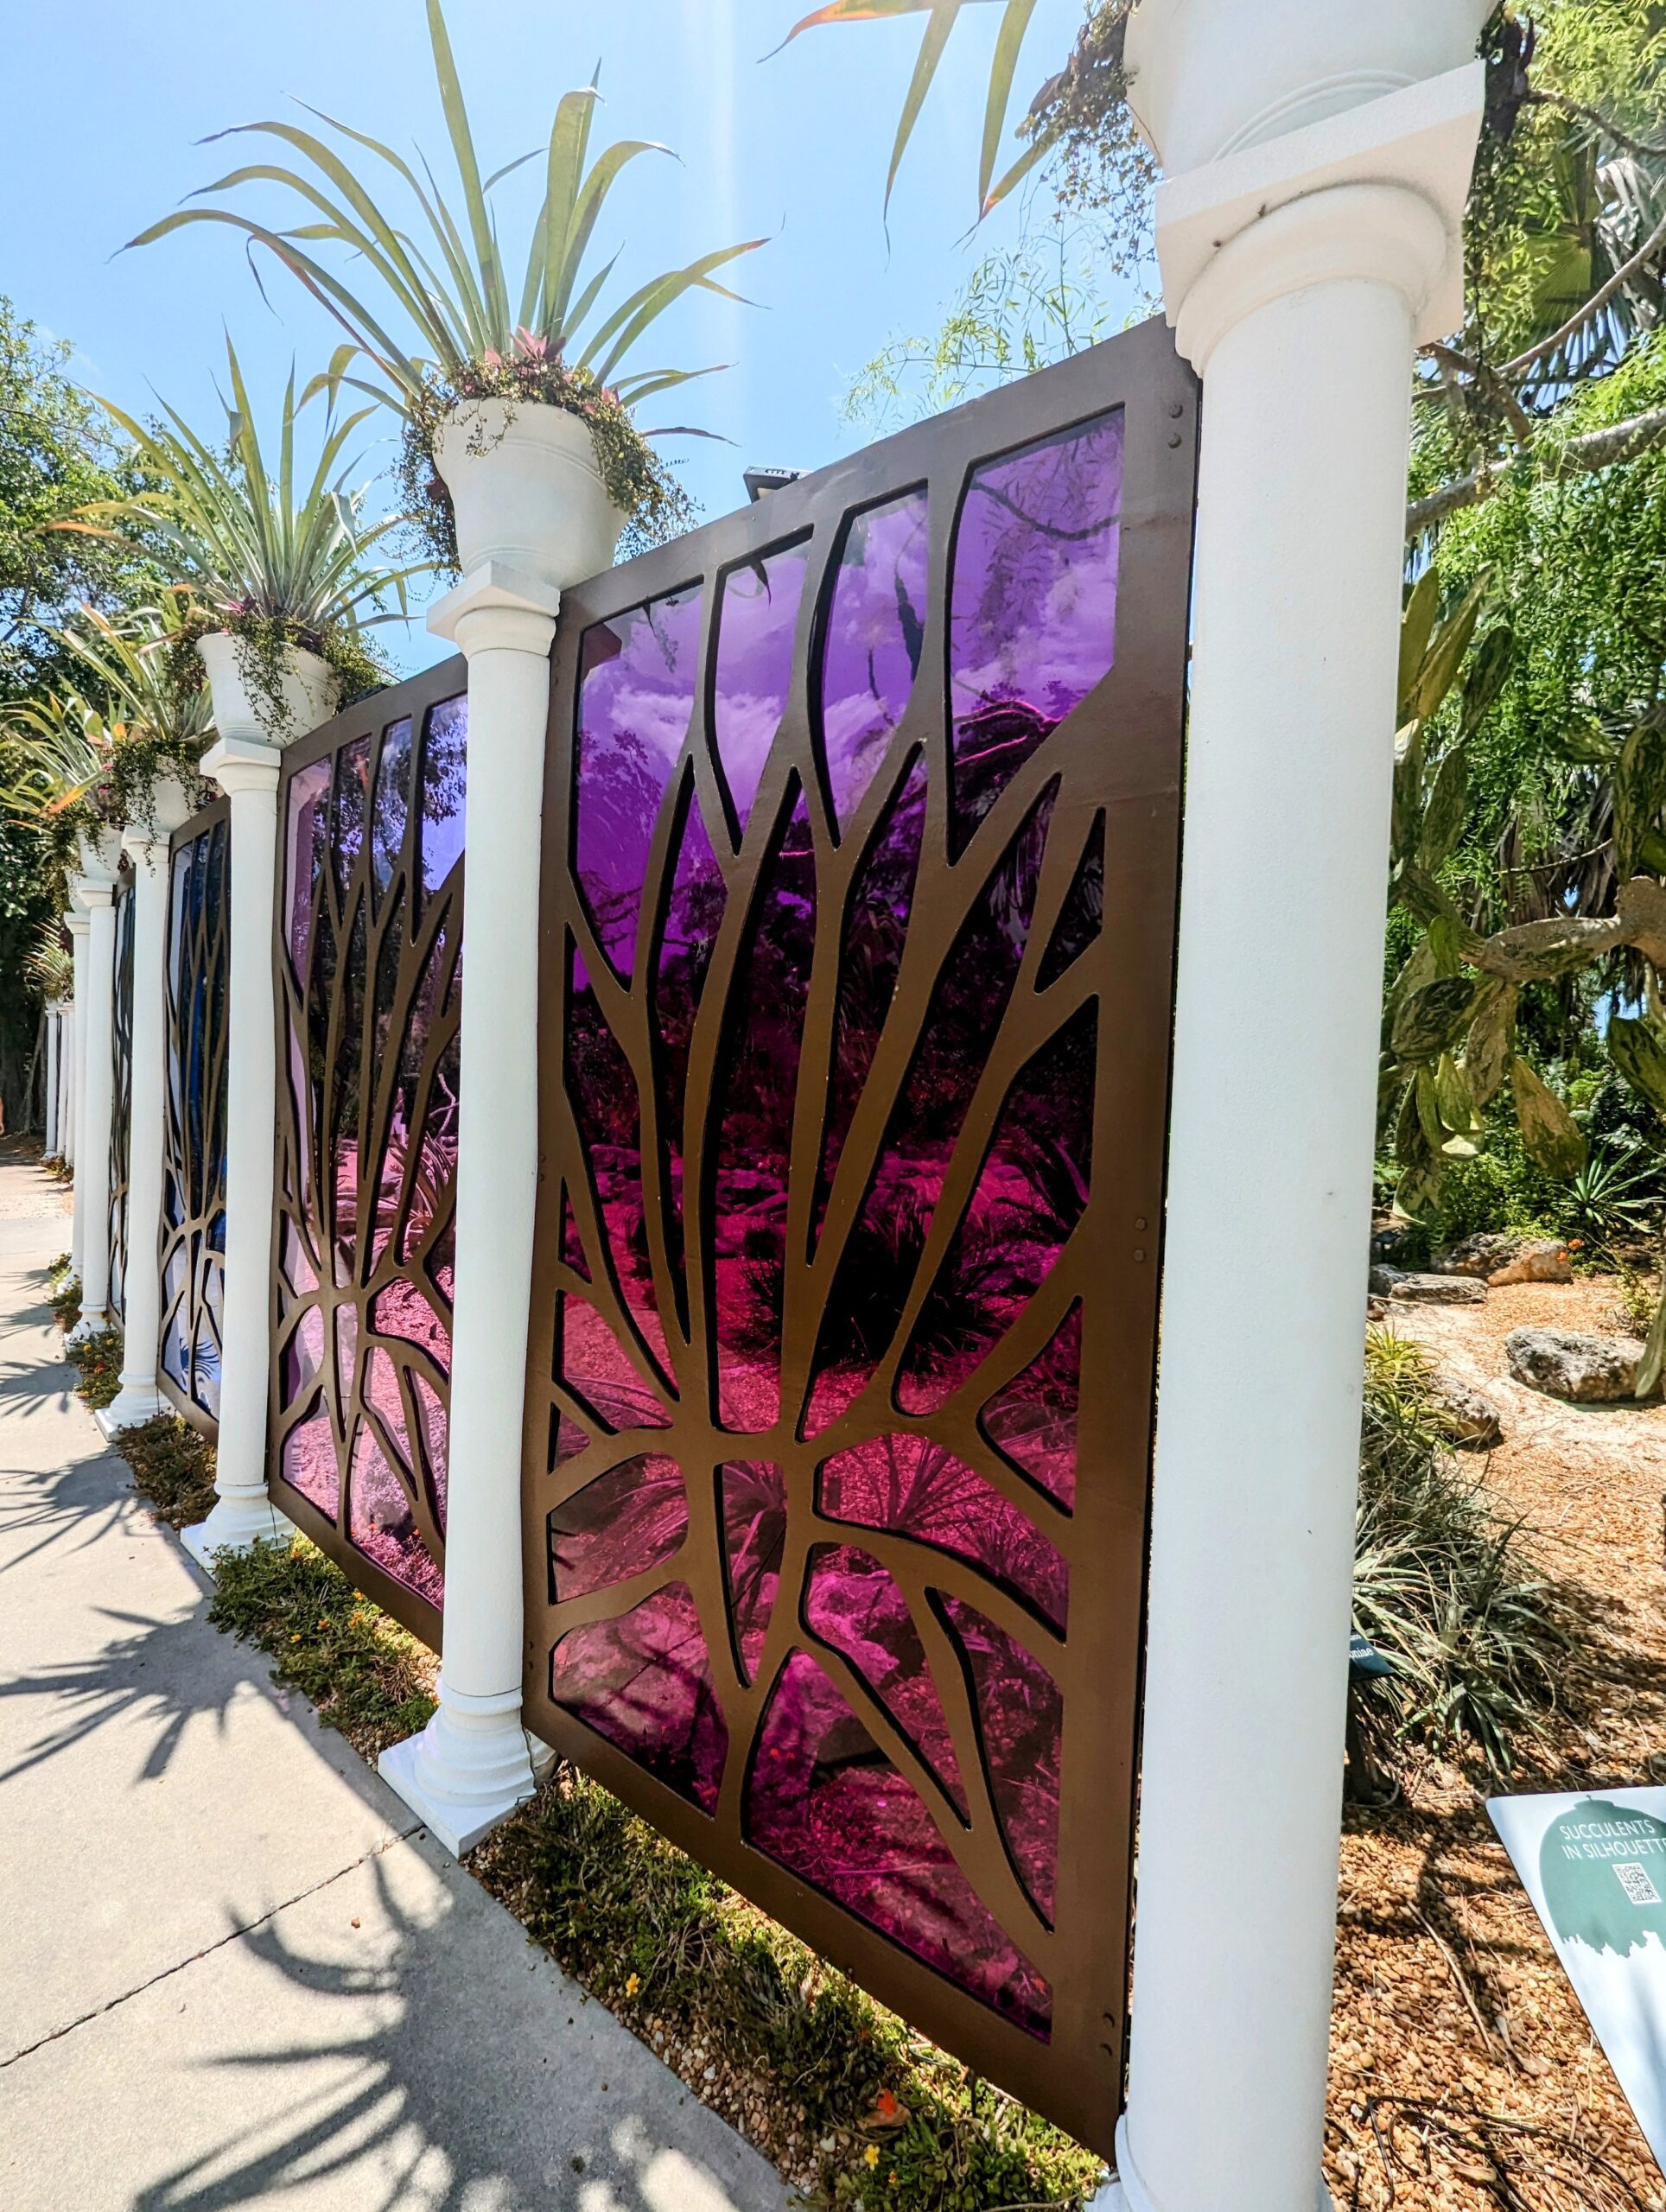 Selby Gardens' Upcoming Exhibition Brings to Life the Vivid Designs of Louis  Comfort Tiffany